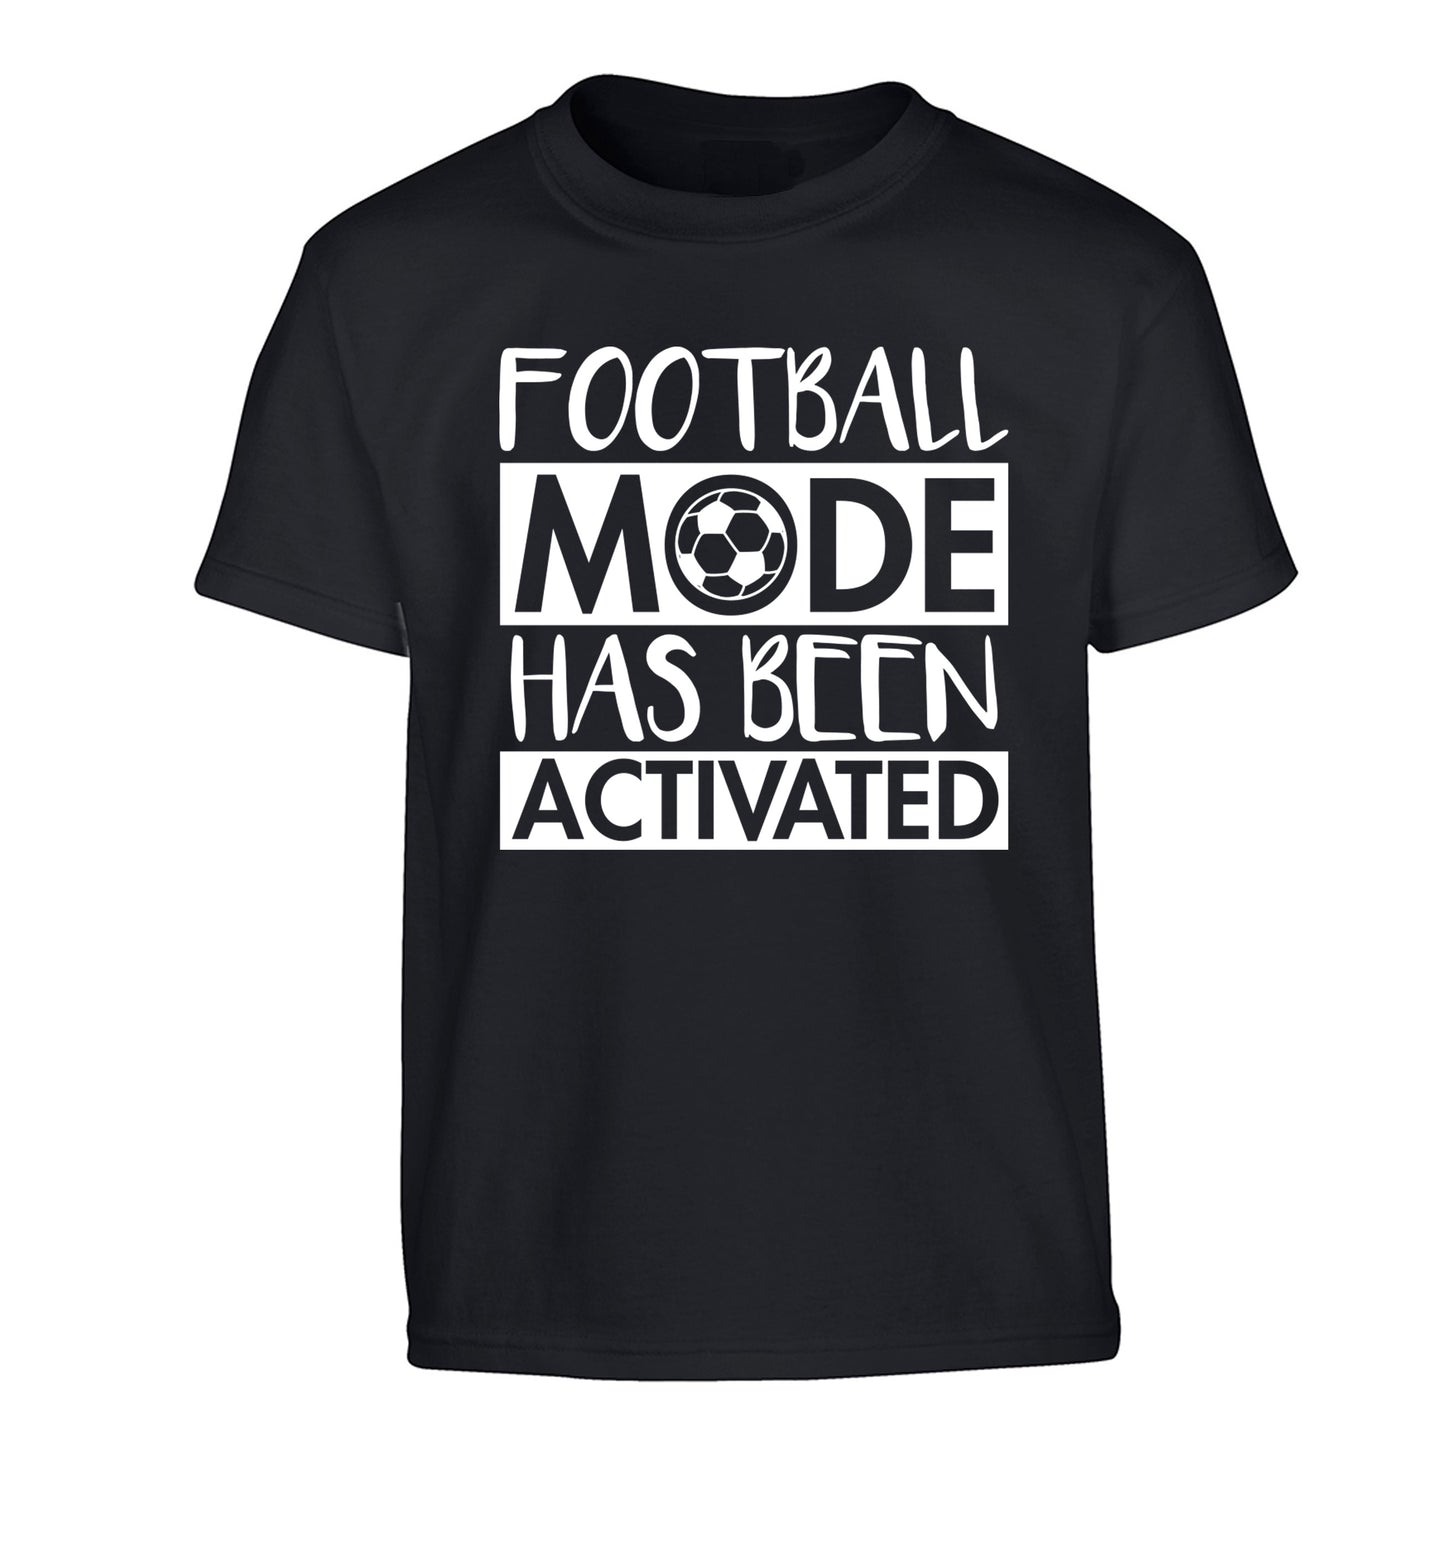 Football mode has been activated Children's black Tshirt 12-14 Years